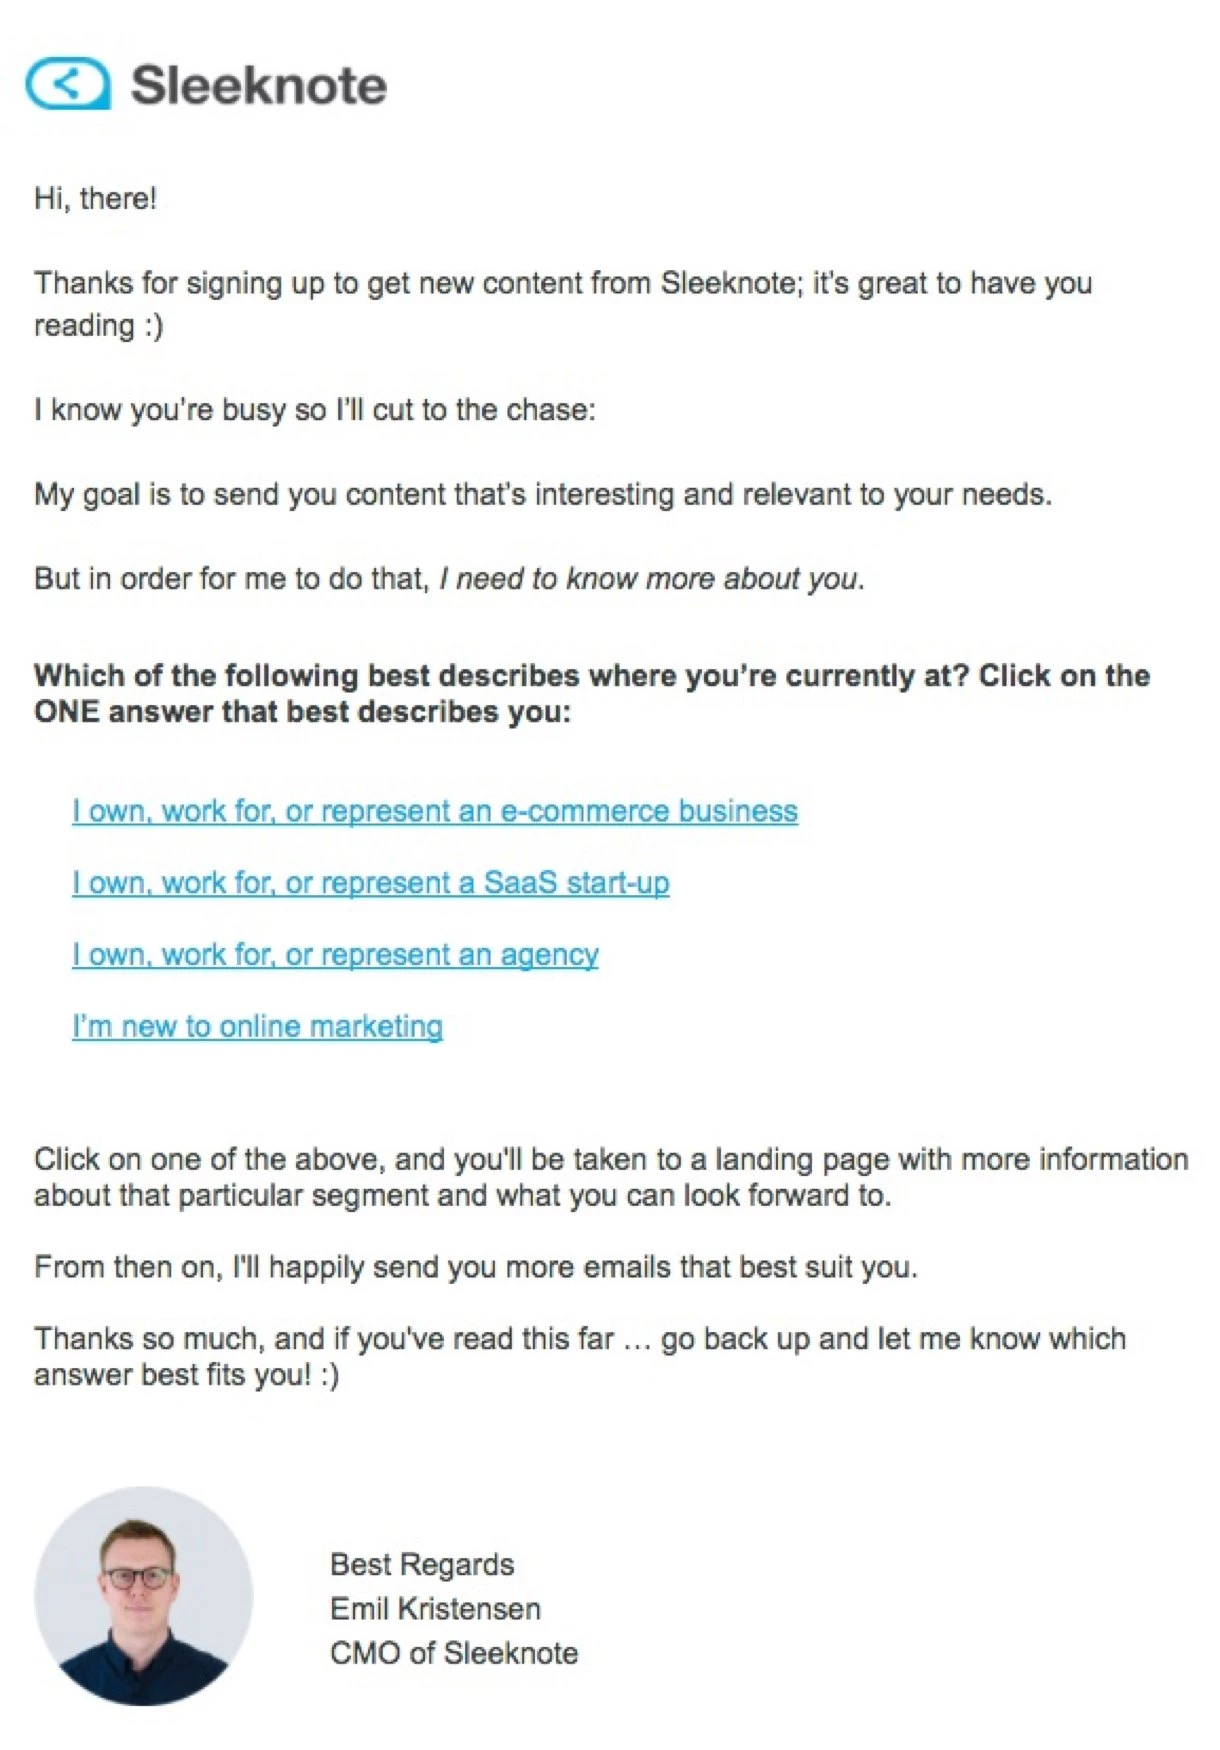 Email survey invitation from Sleeknote with the links to segments subscribers based on their job titles. 